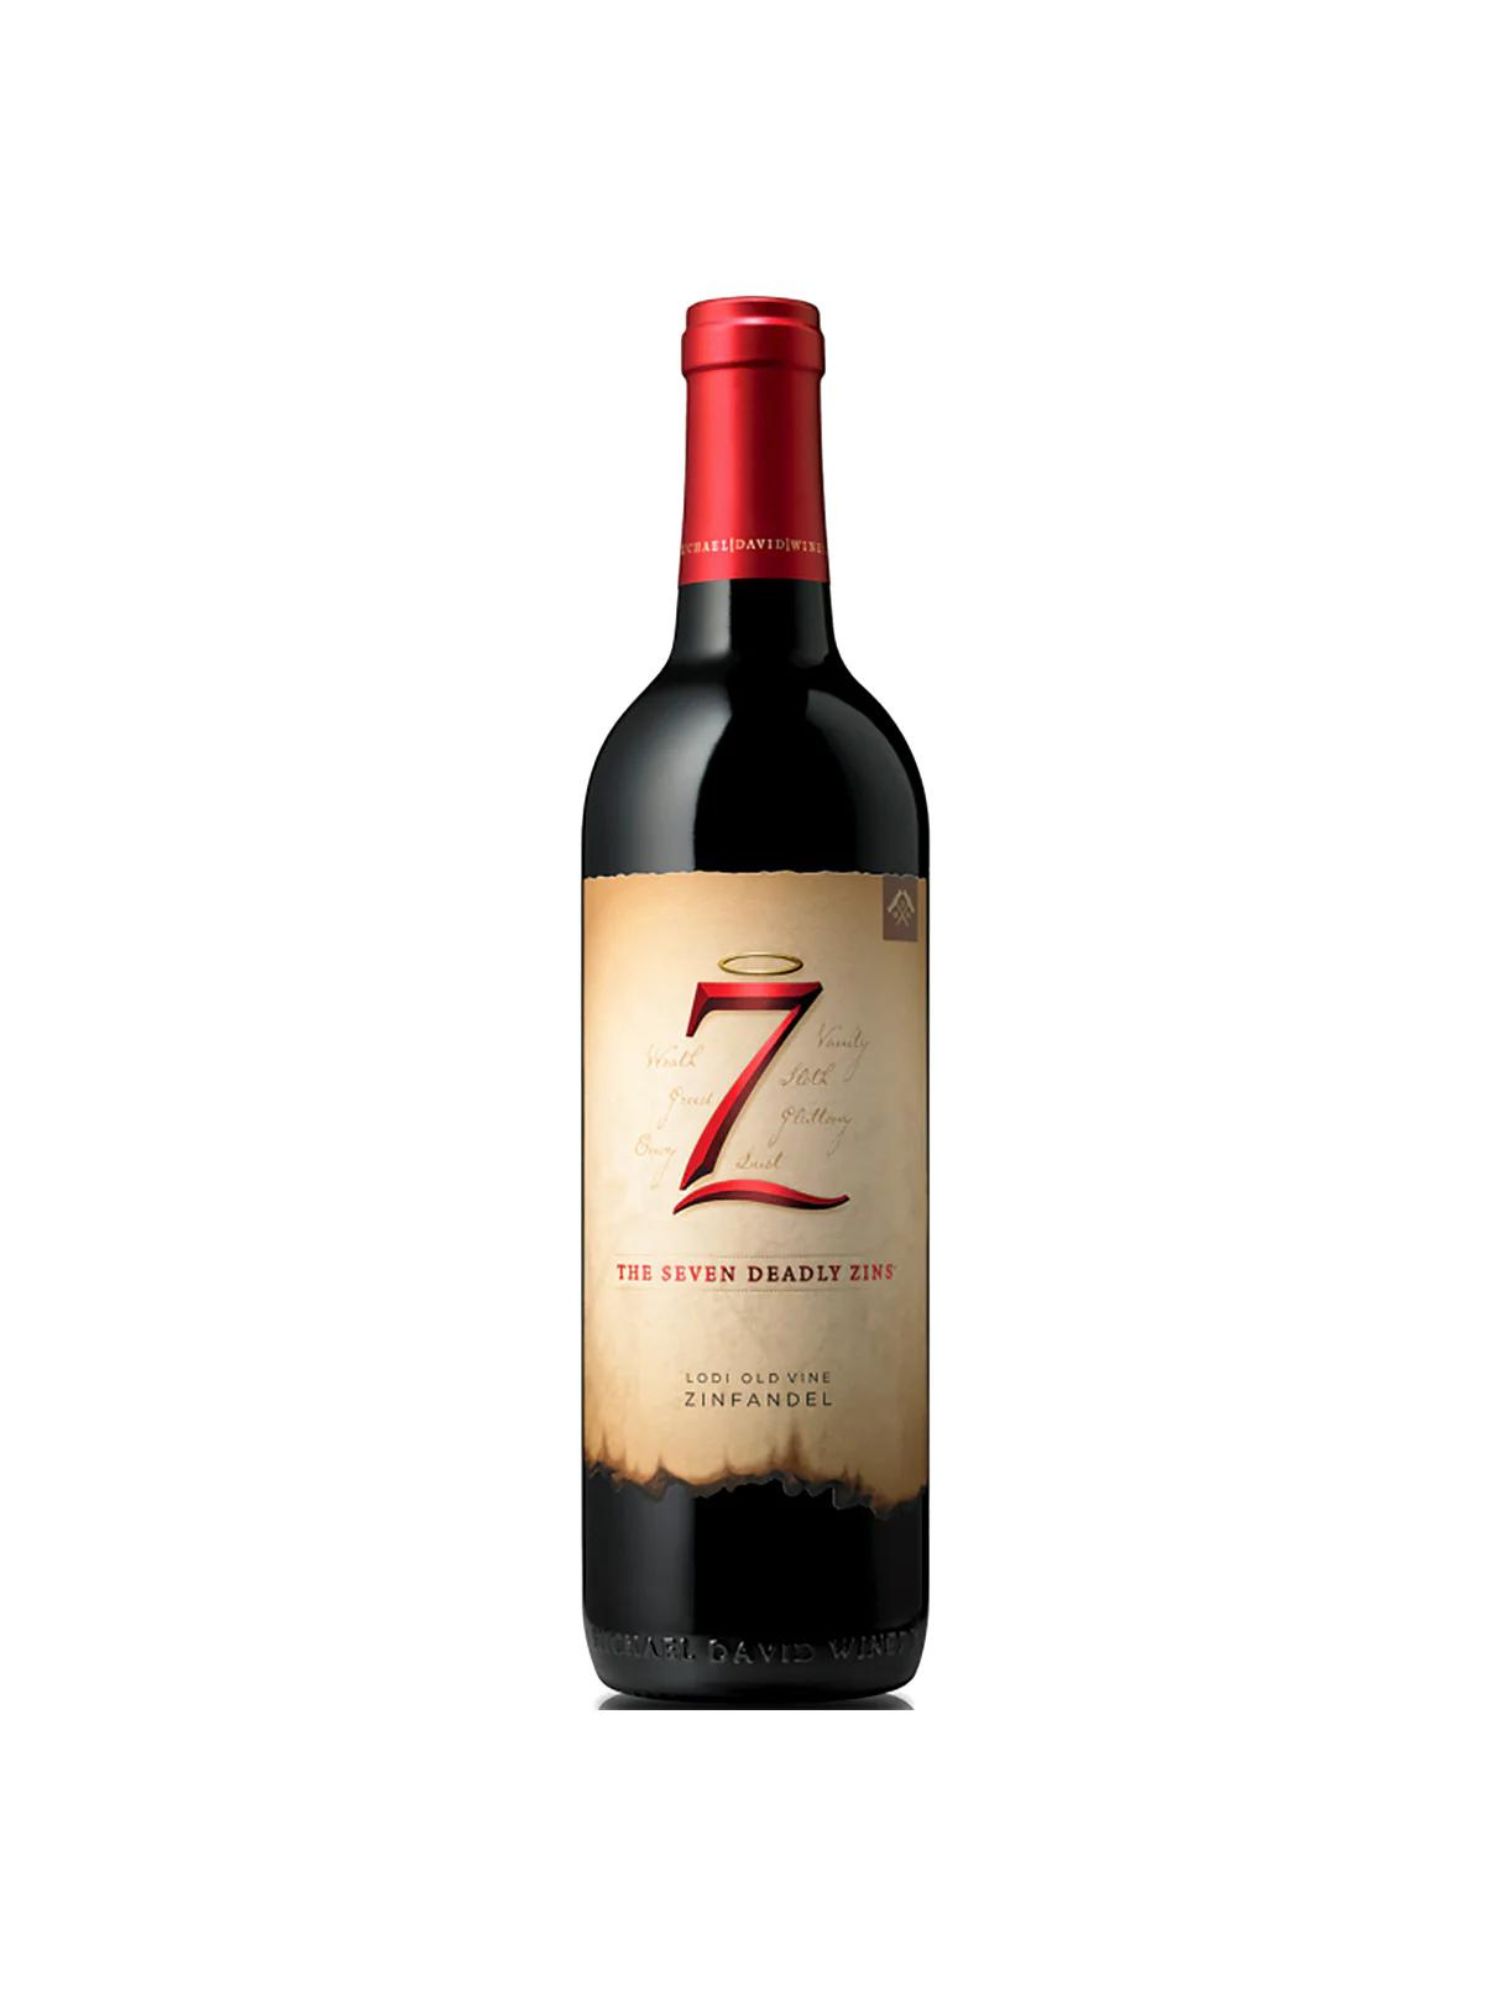 a bottle of zinfandel which is a low acid red wine